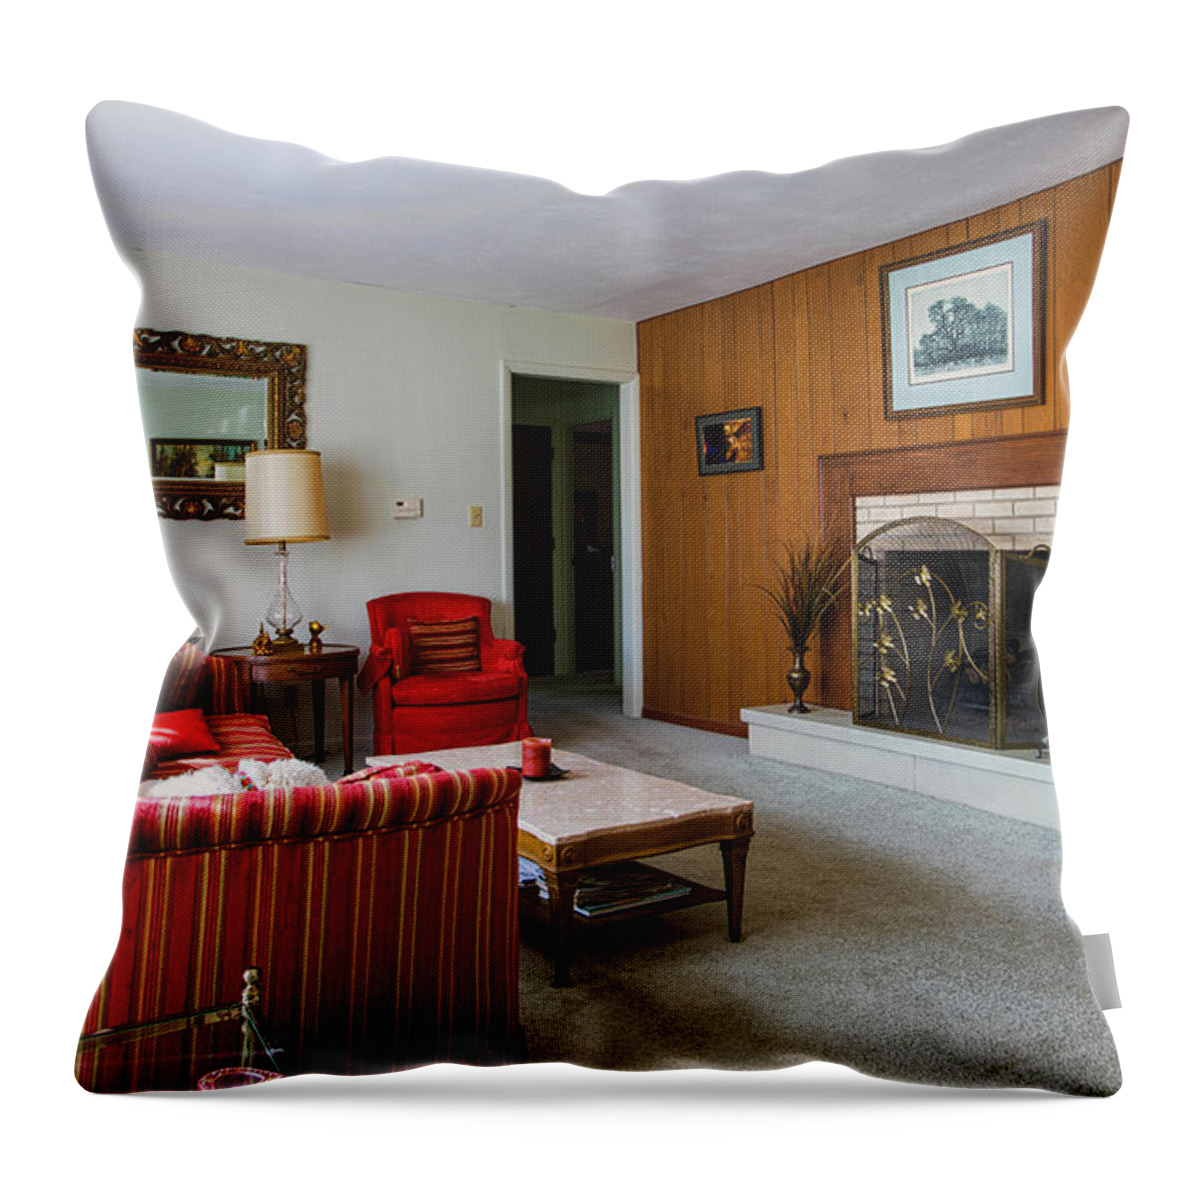 Real Estate Photography Throw Pillow featuring the photograph Sample Living Room - 908 by Jeff Kurtz